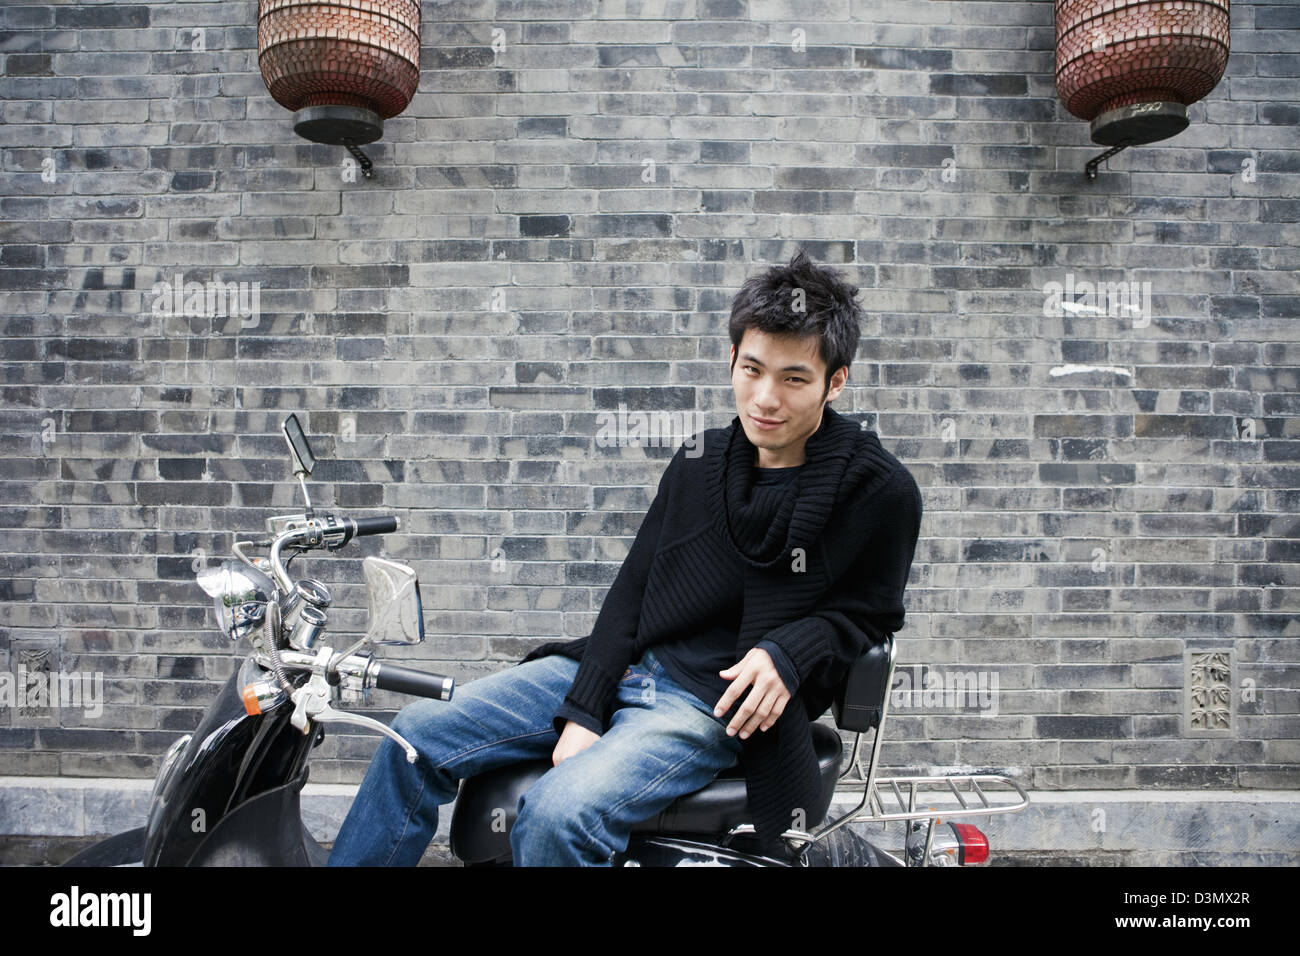 A fashionable young man in China Stock Photo